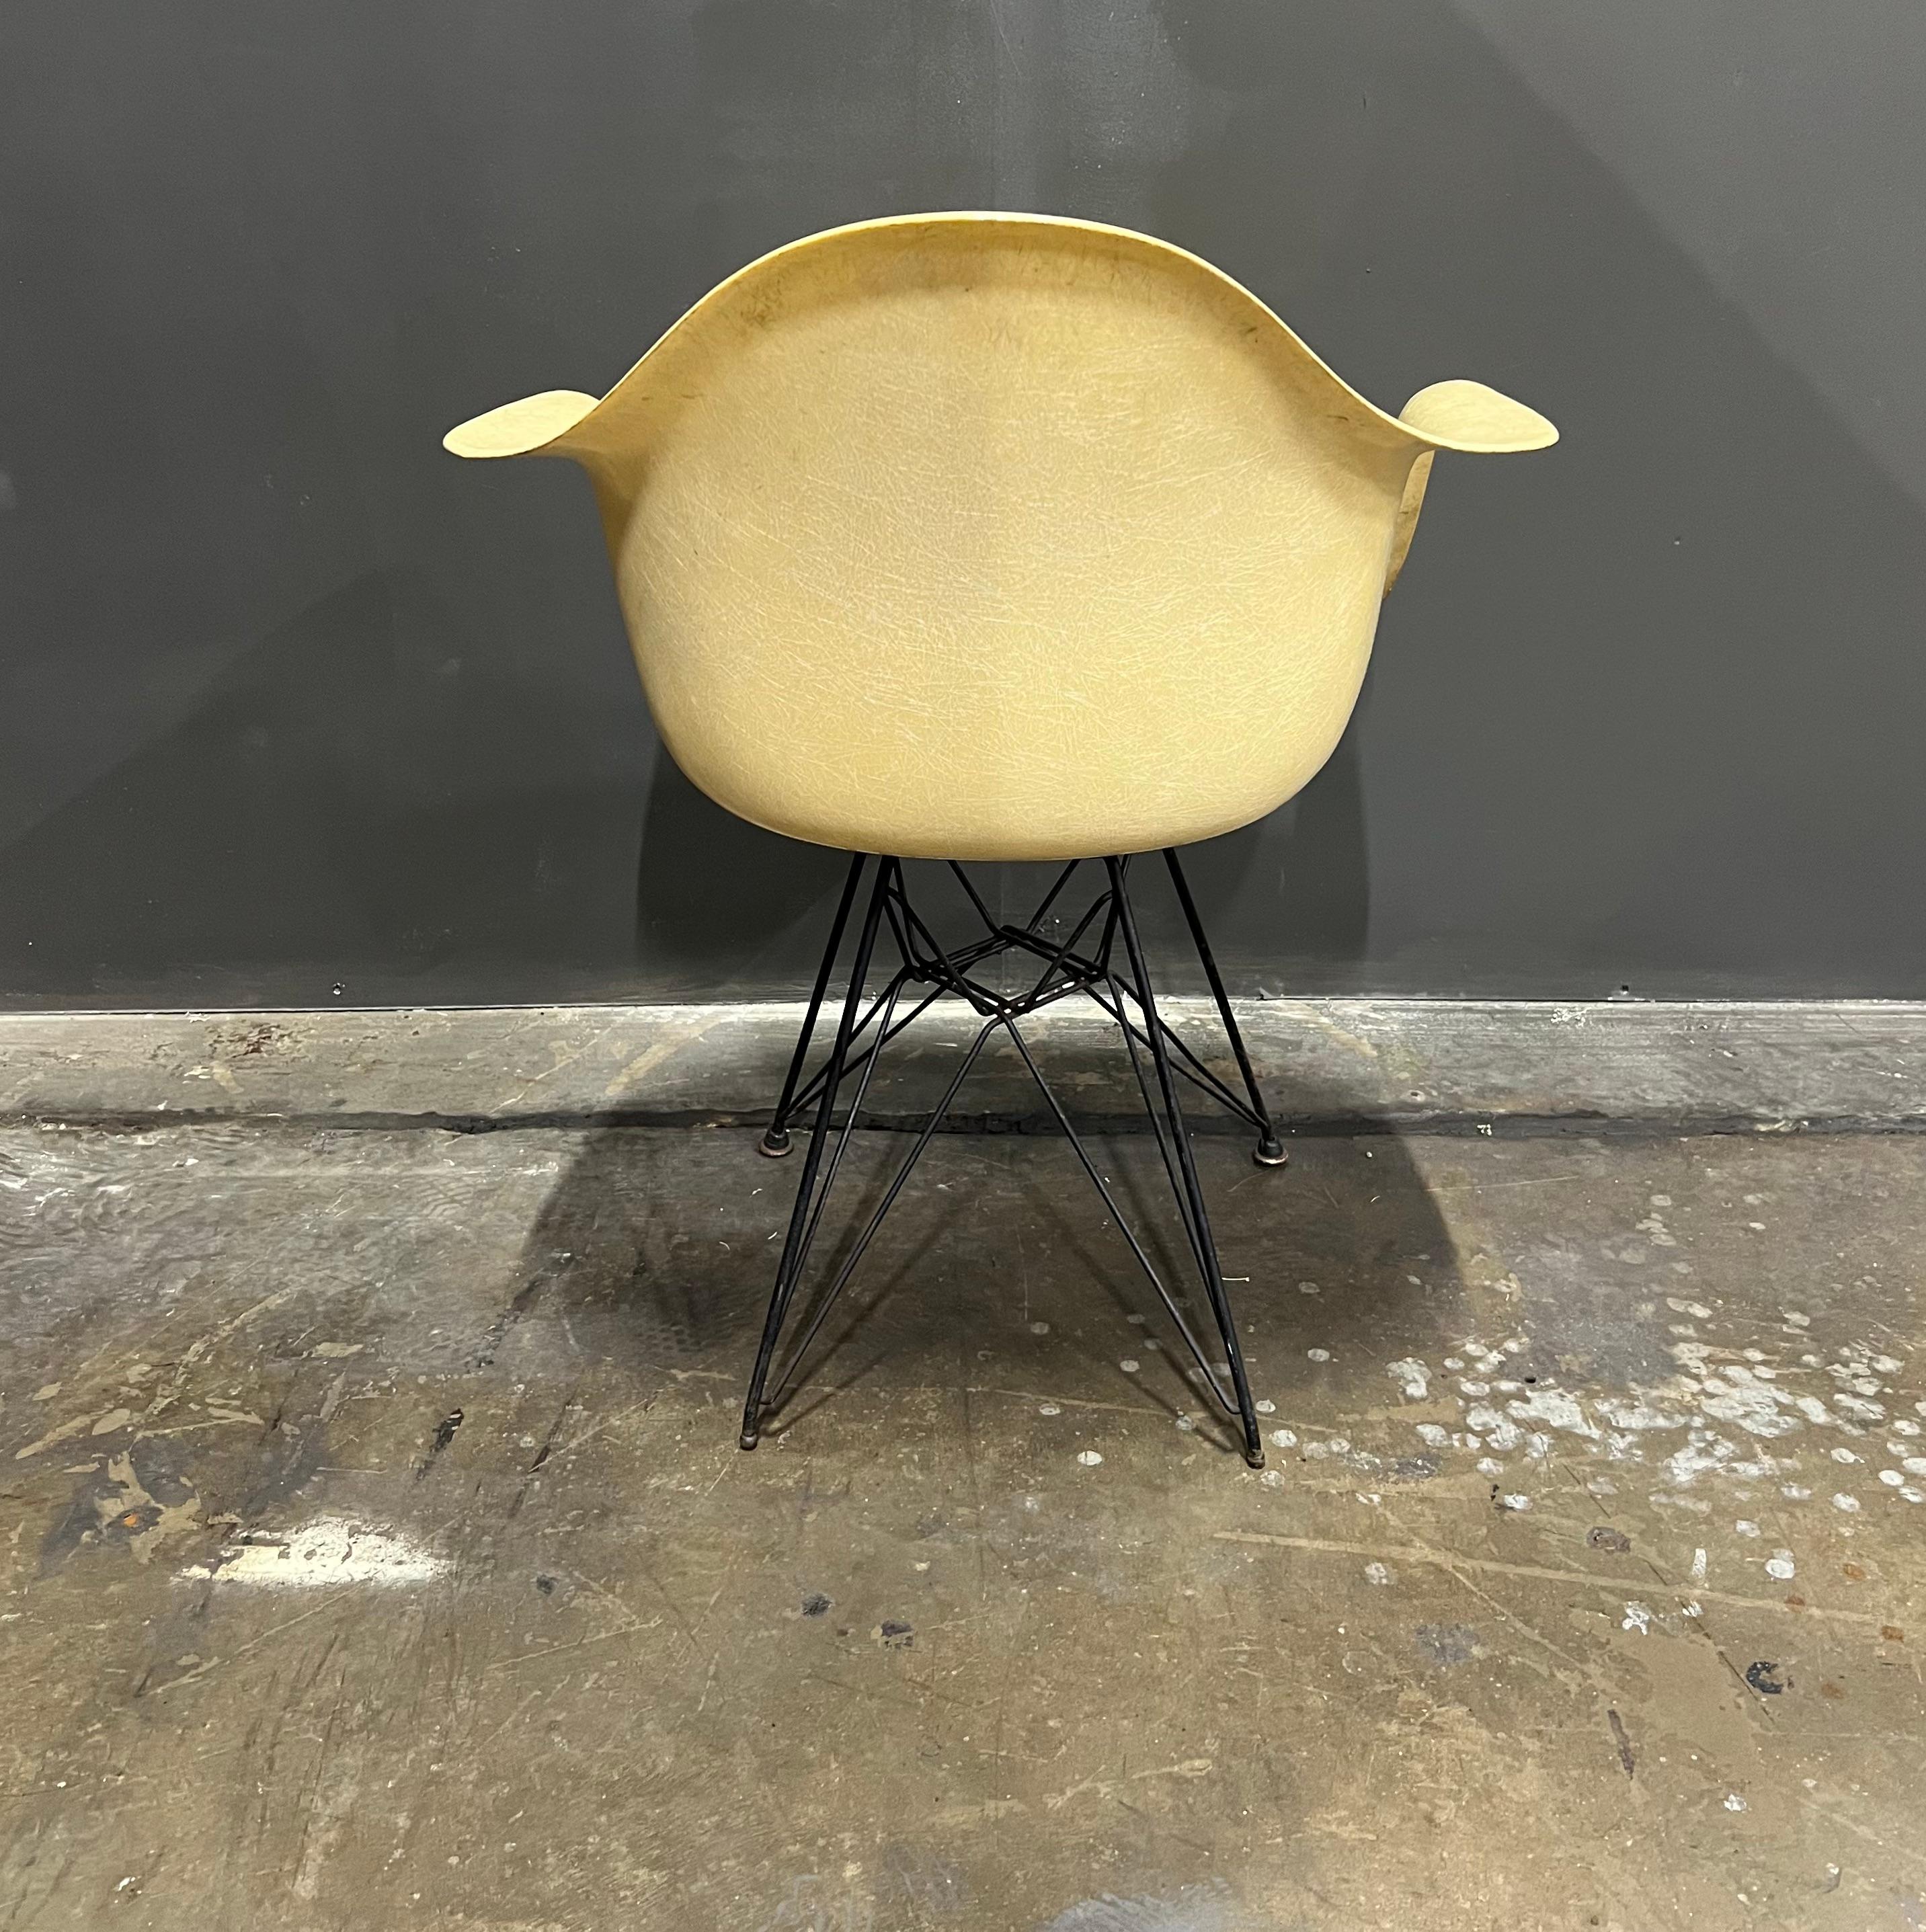 Second Generation All Original Eames Fiberglass with Dar Eiffel Tower Base In Good Condition For Sale In Philadelphia, PA